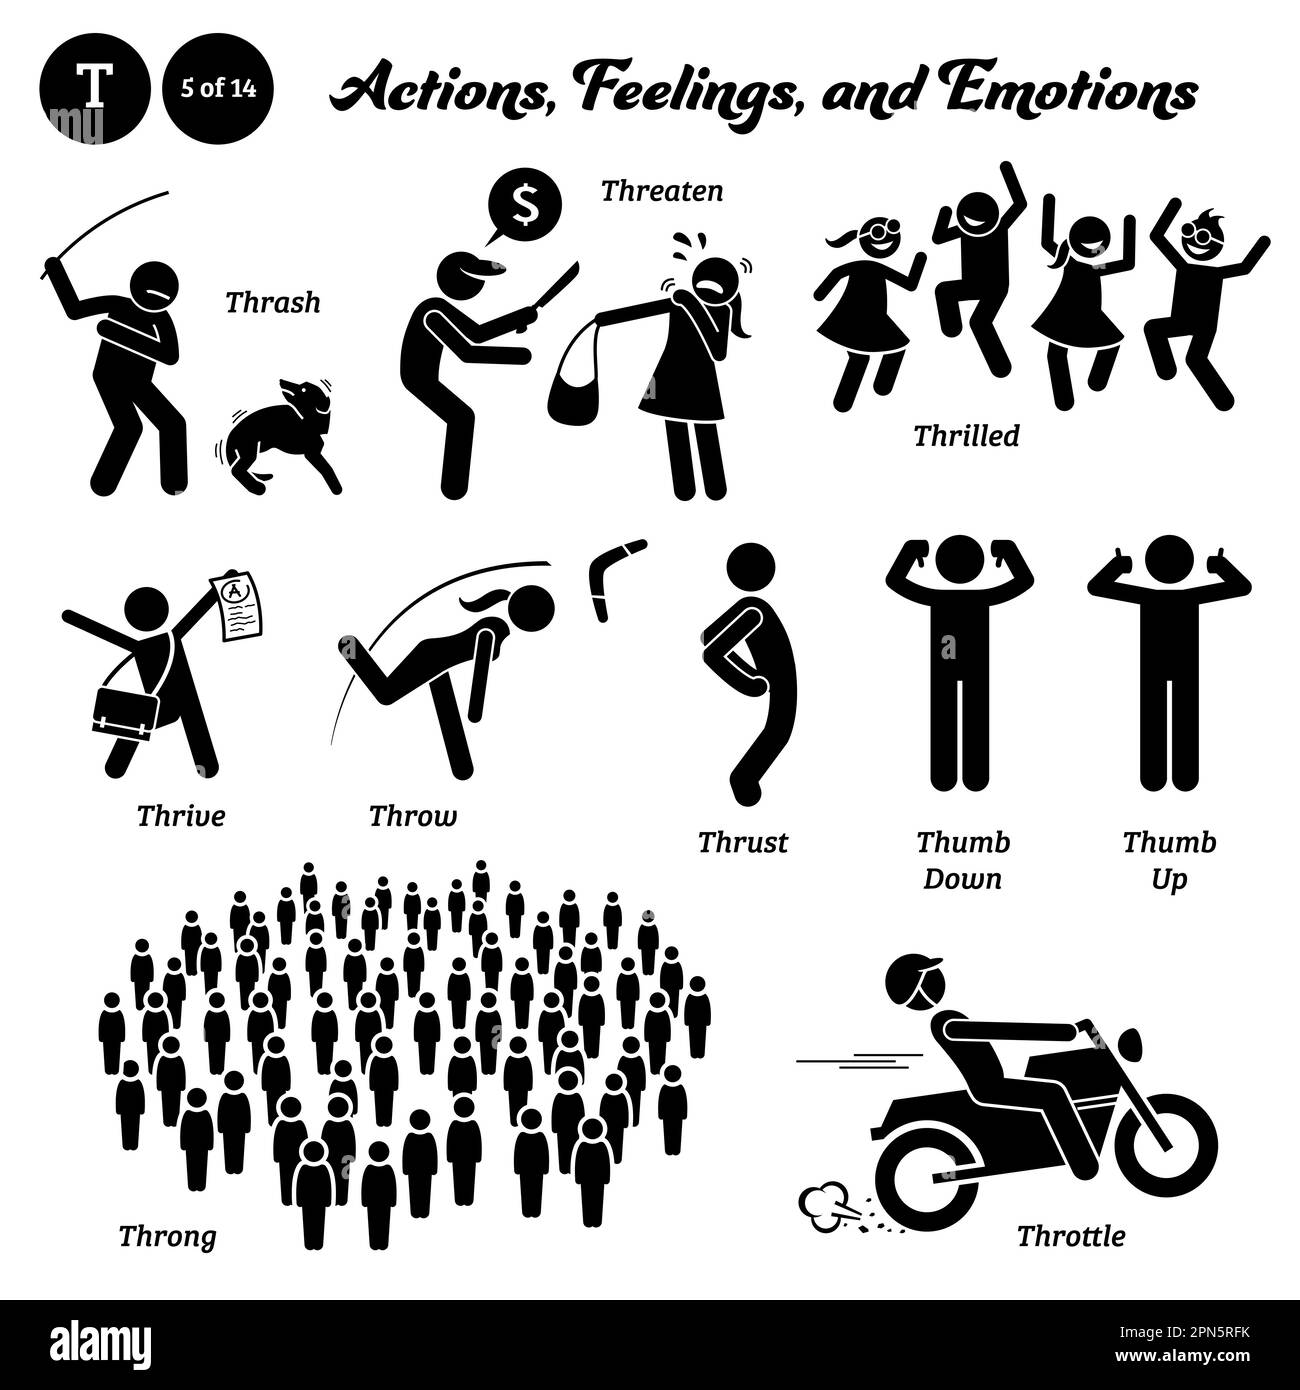 Stick figure human people man action, feelings, and emotions icons alphabet T. Thrash, threaten, thrilled, thrive, throw, thrust, thumb down, thumb up Stock Vector